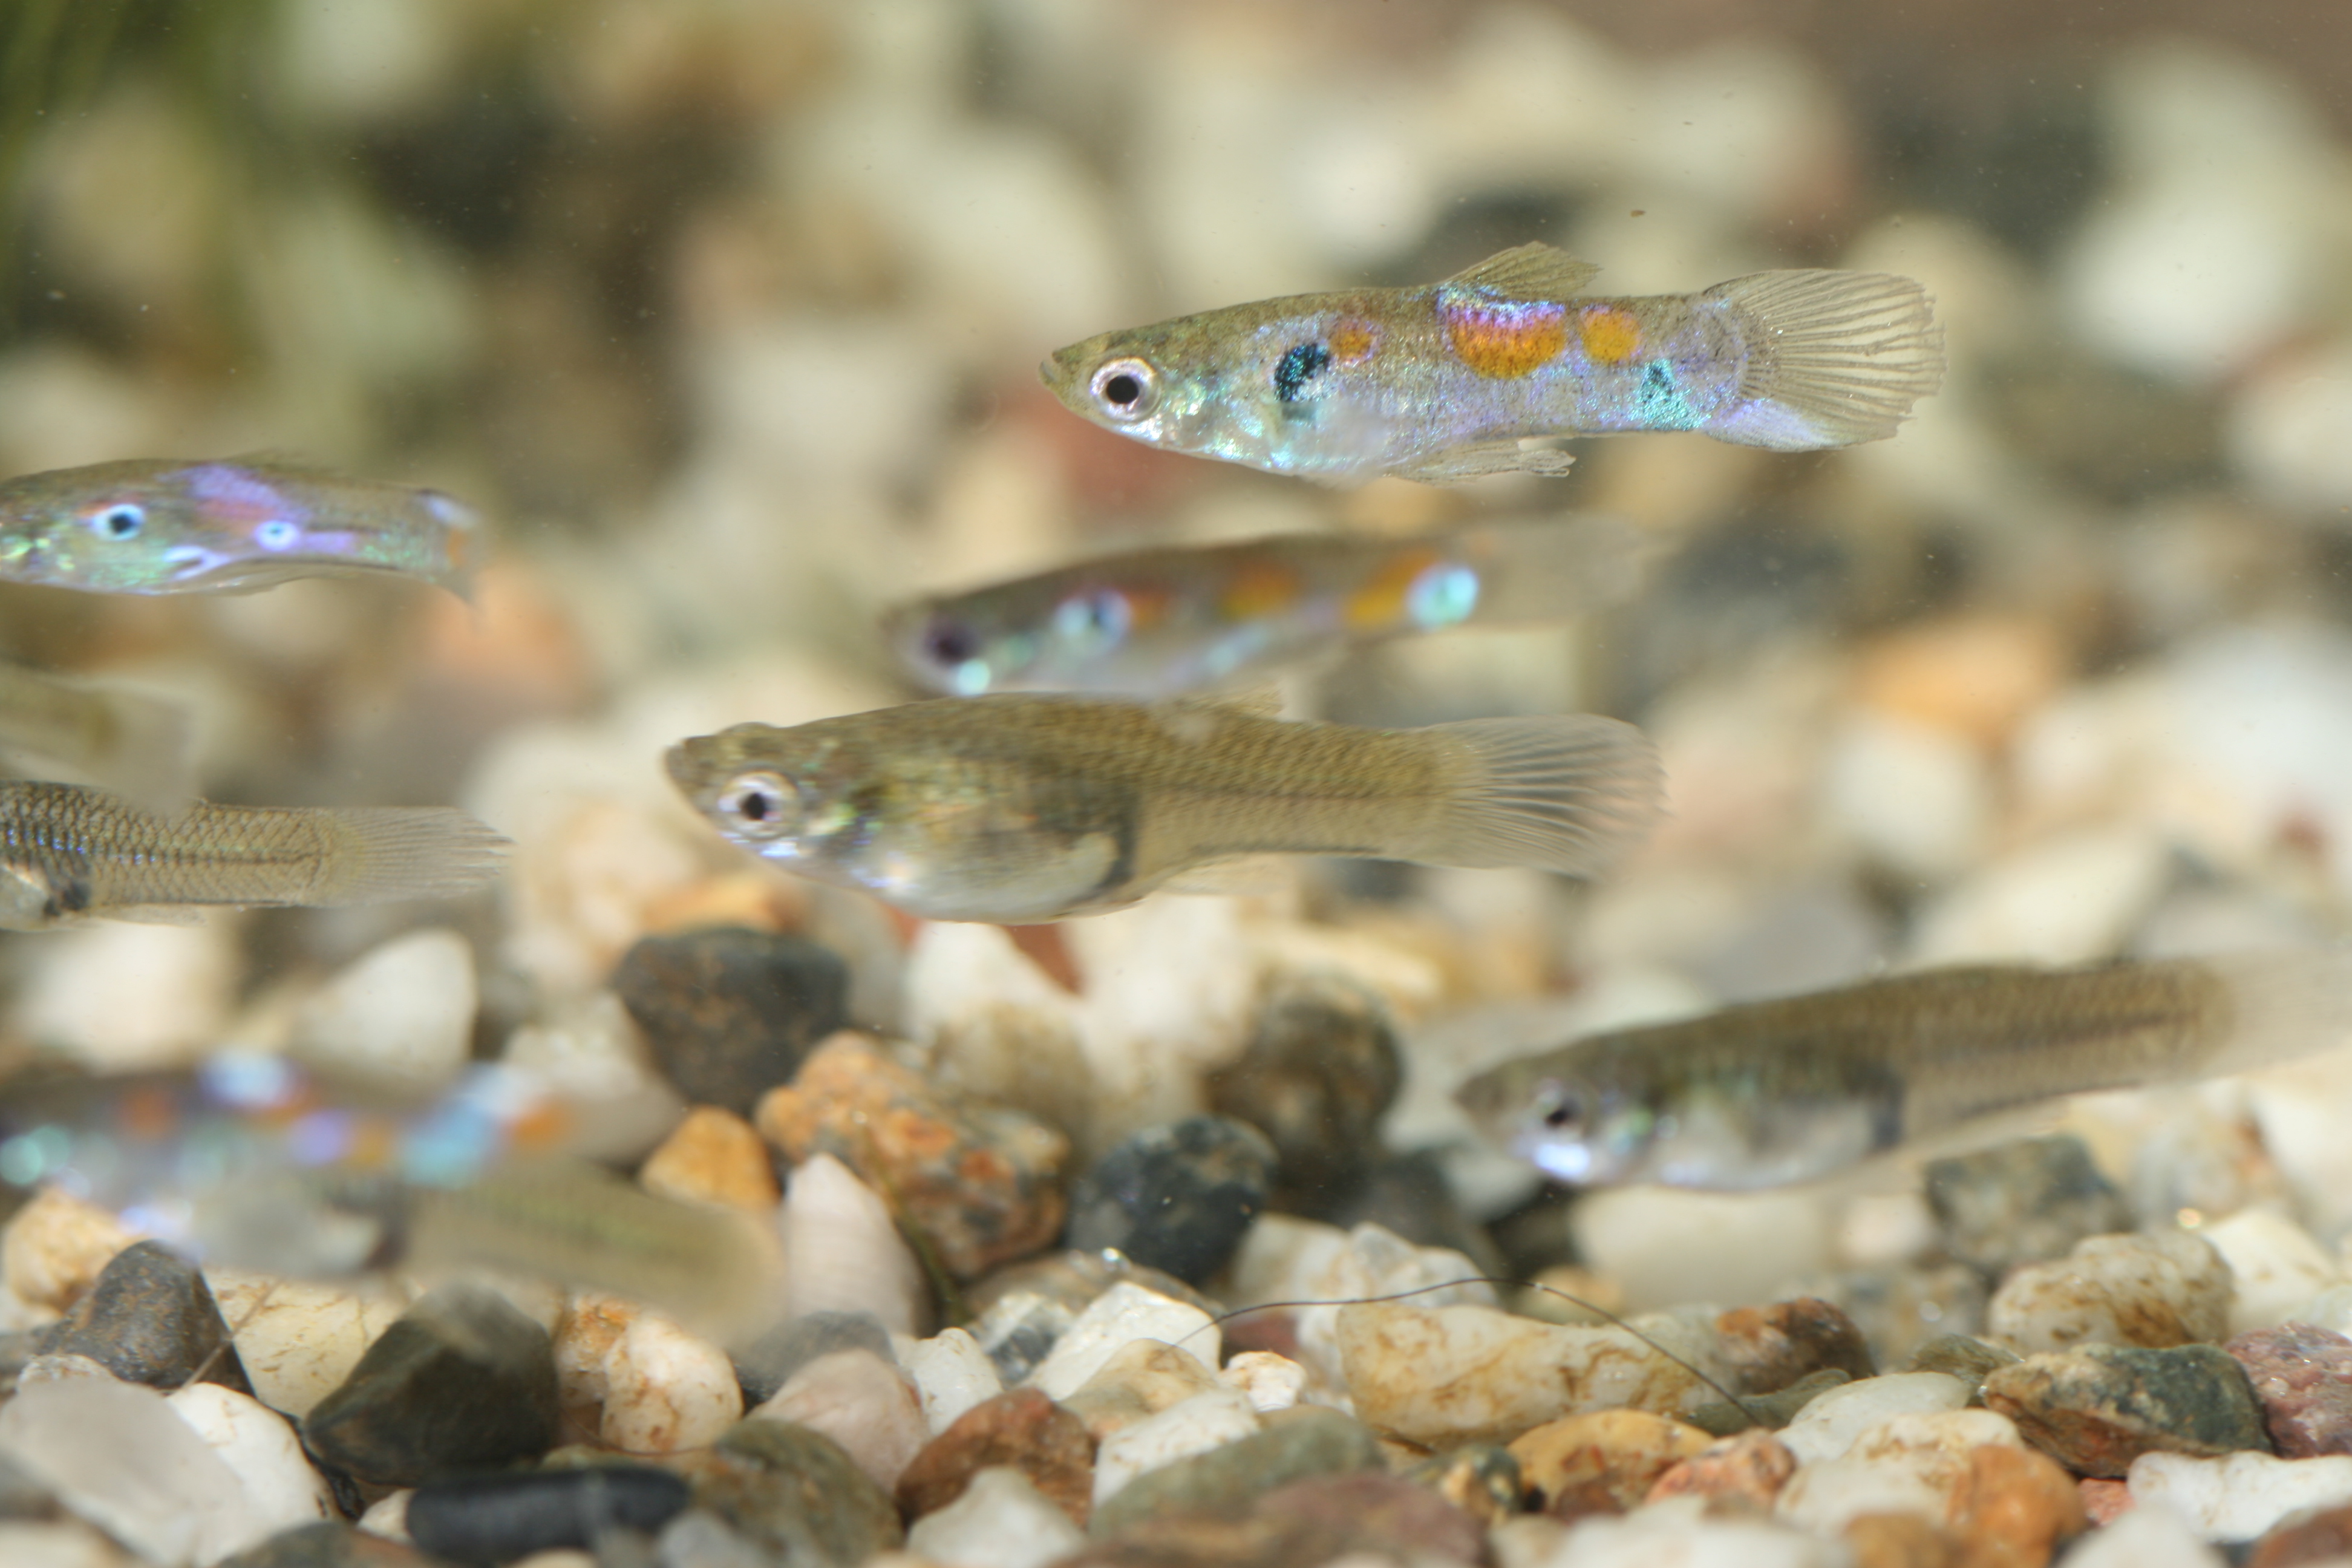 A group of Poecilia reticulata (guppy) from McCauley Spring, New Mexico.